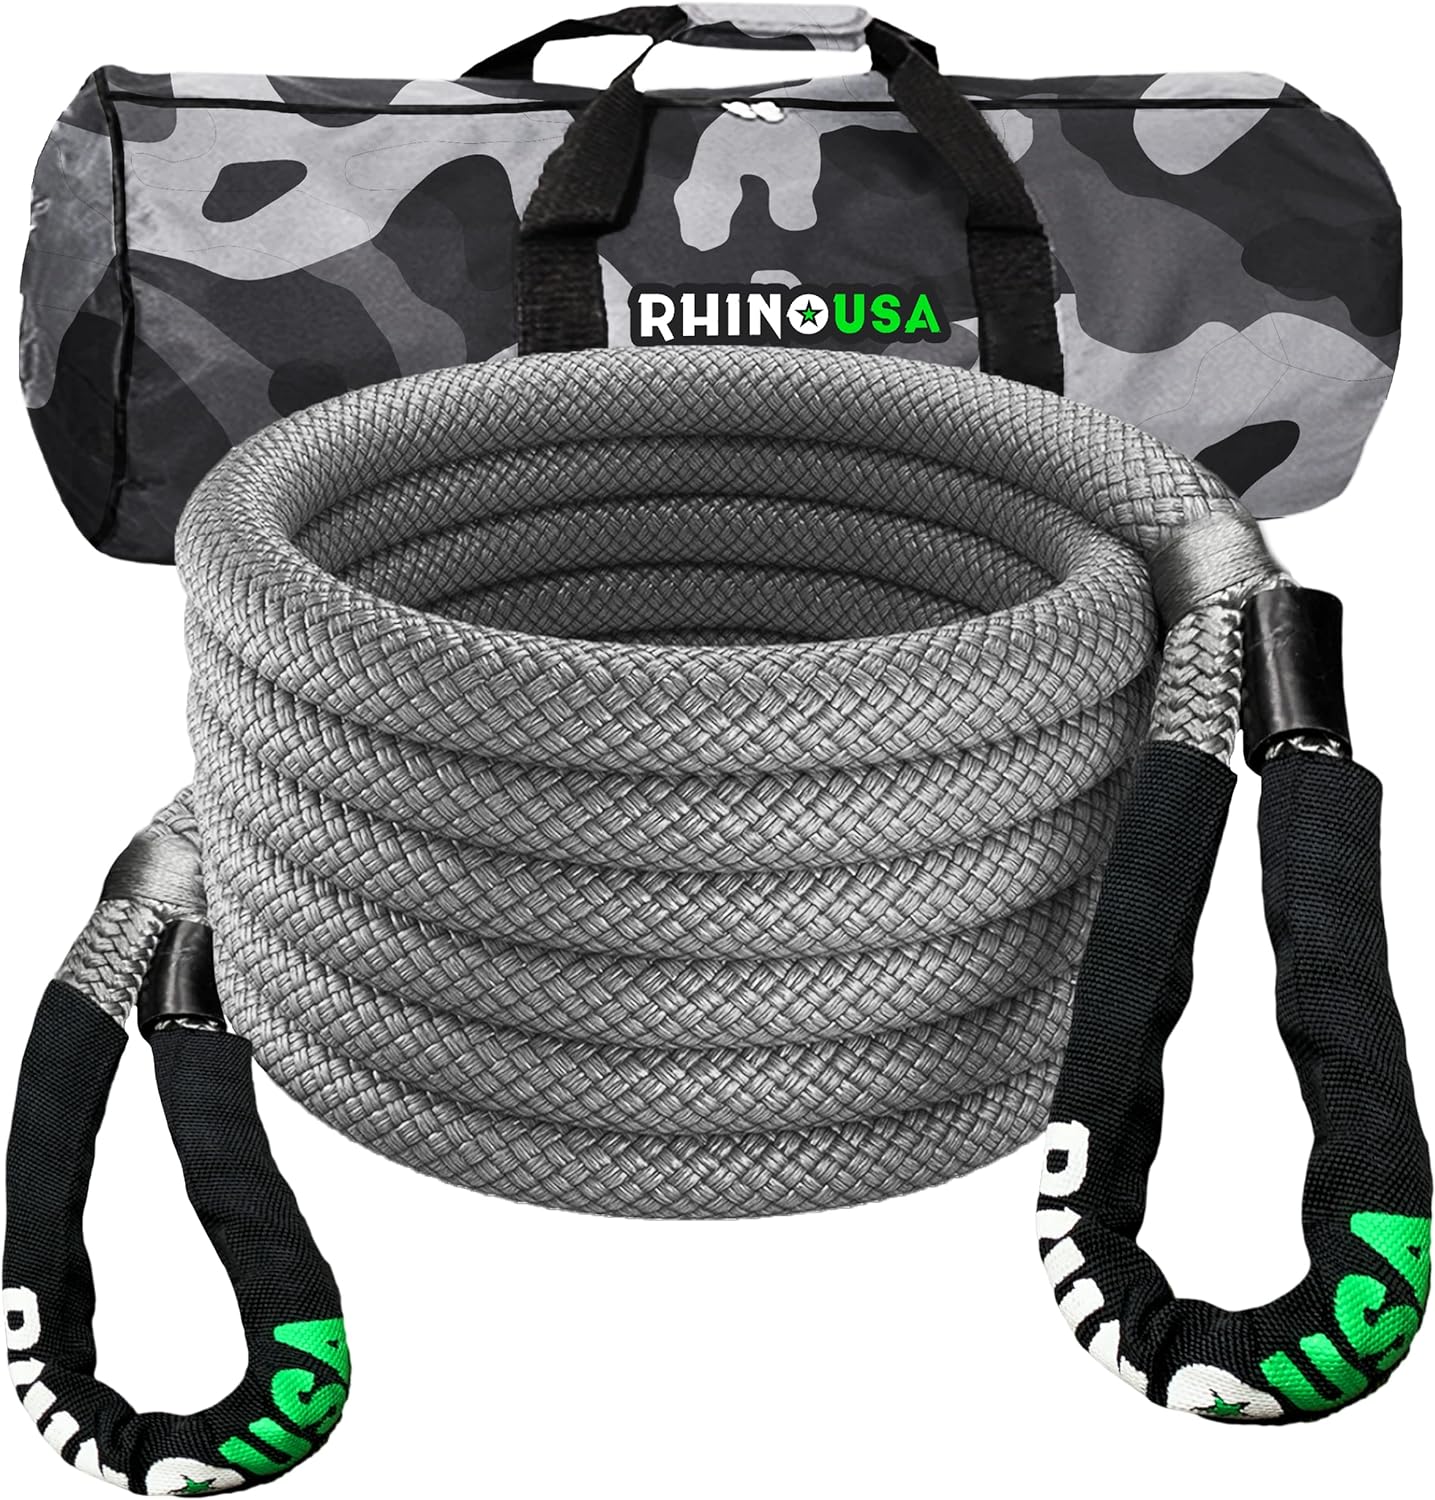 Generic Rhino USA Kinetic Recovery Tow Rope (1in x 30ft Gray) Heavy Duty Offroad Snatch Strap for UTV, ATV, Truck, Car, Jeep, Tractor -